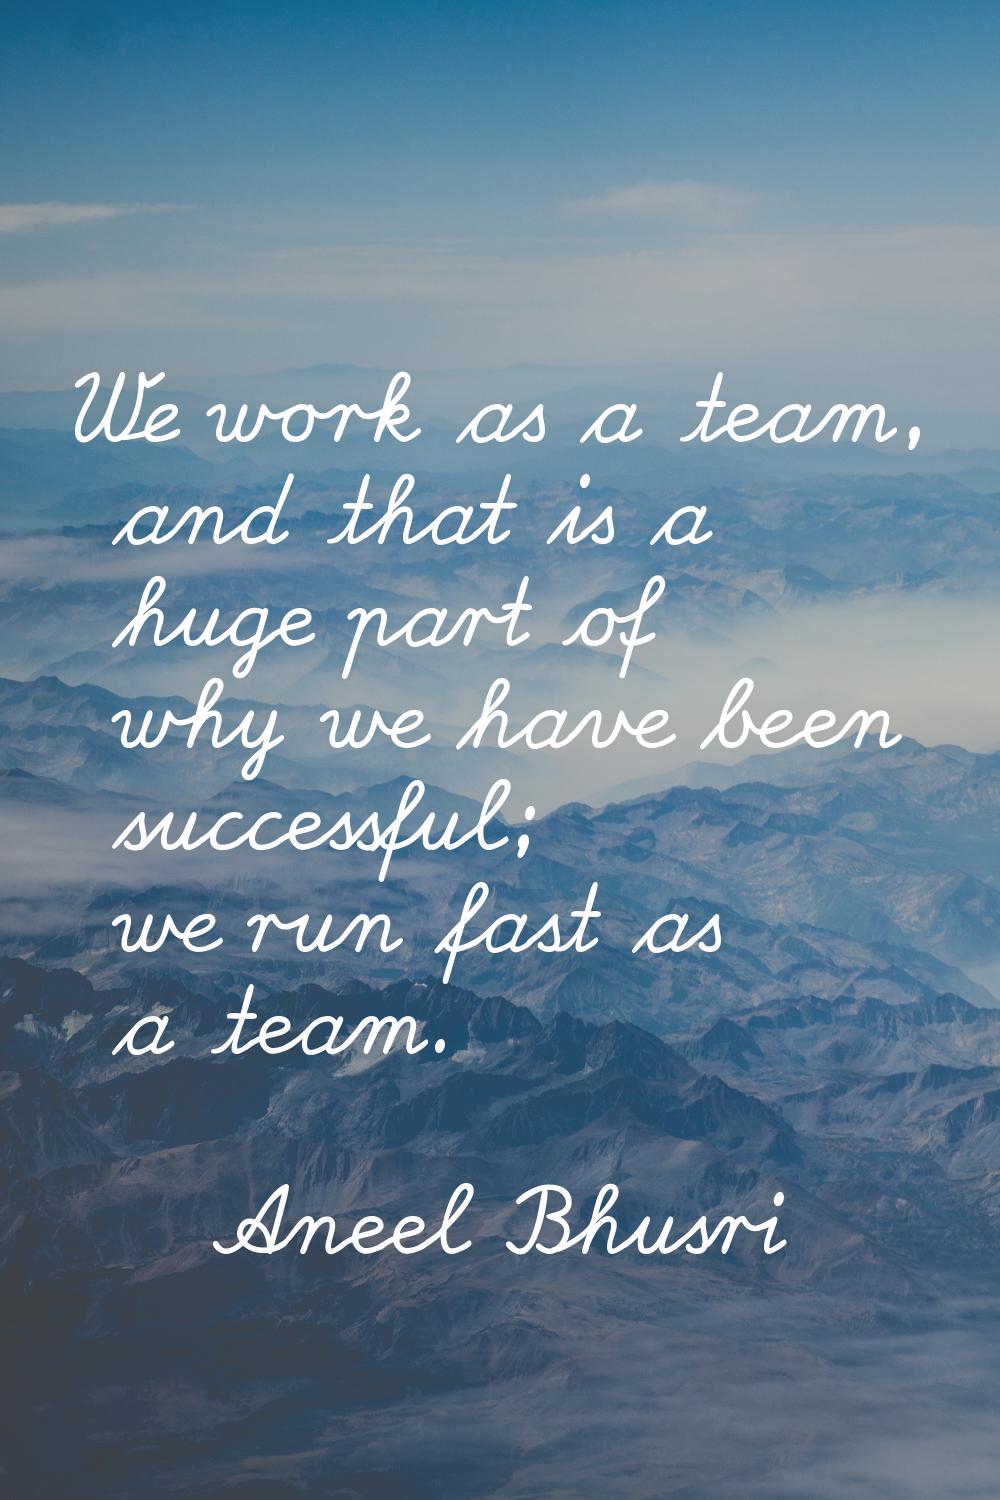 We work as a team, and that is a huge part of why we have been successful; we run fast as a team.